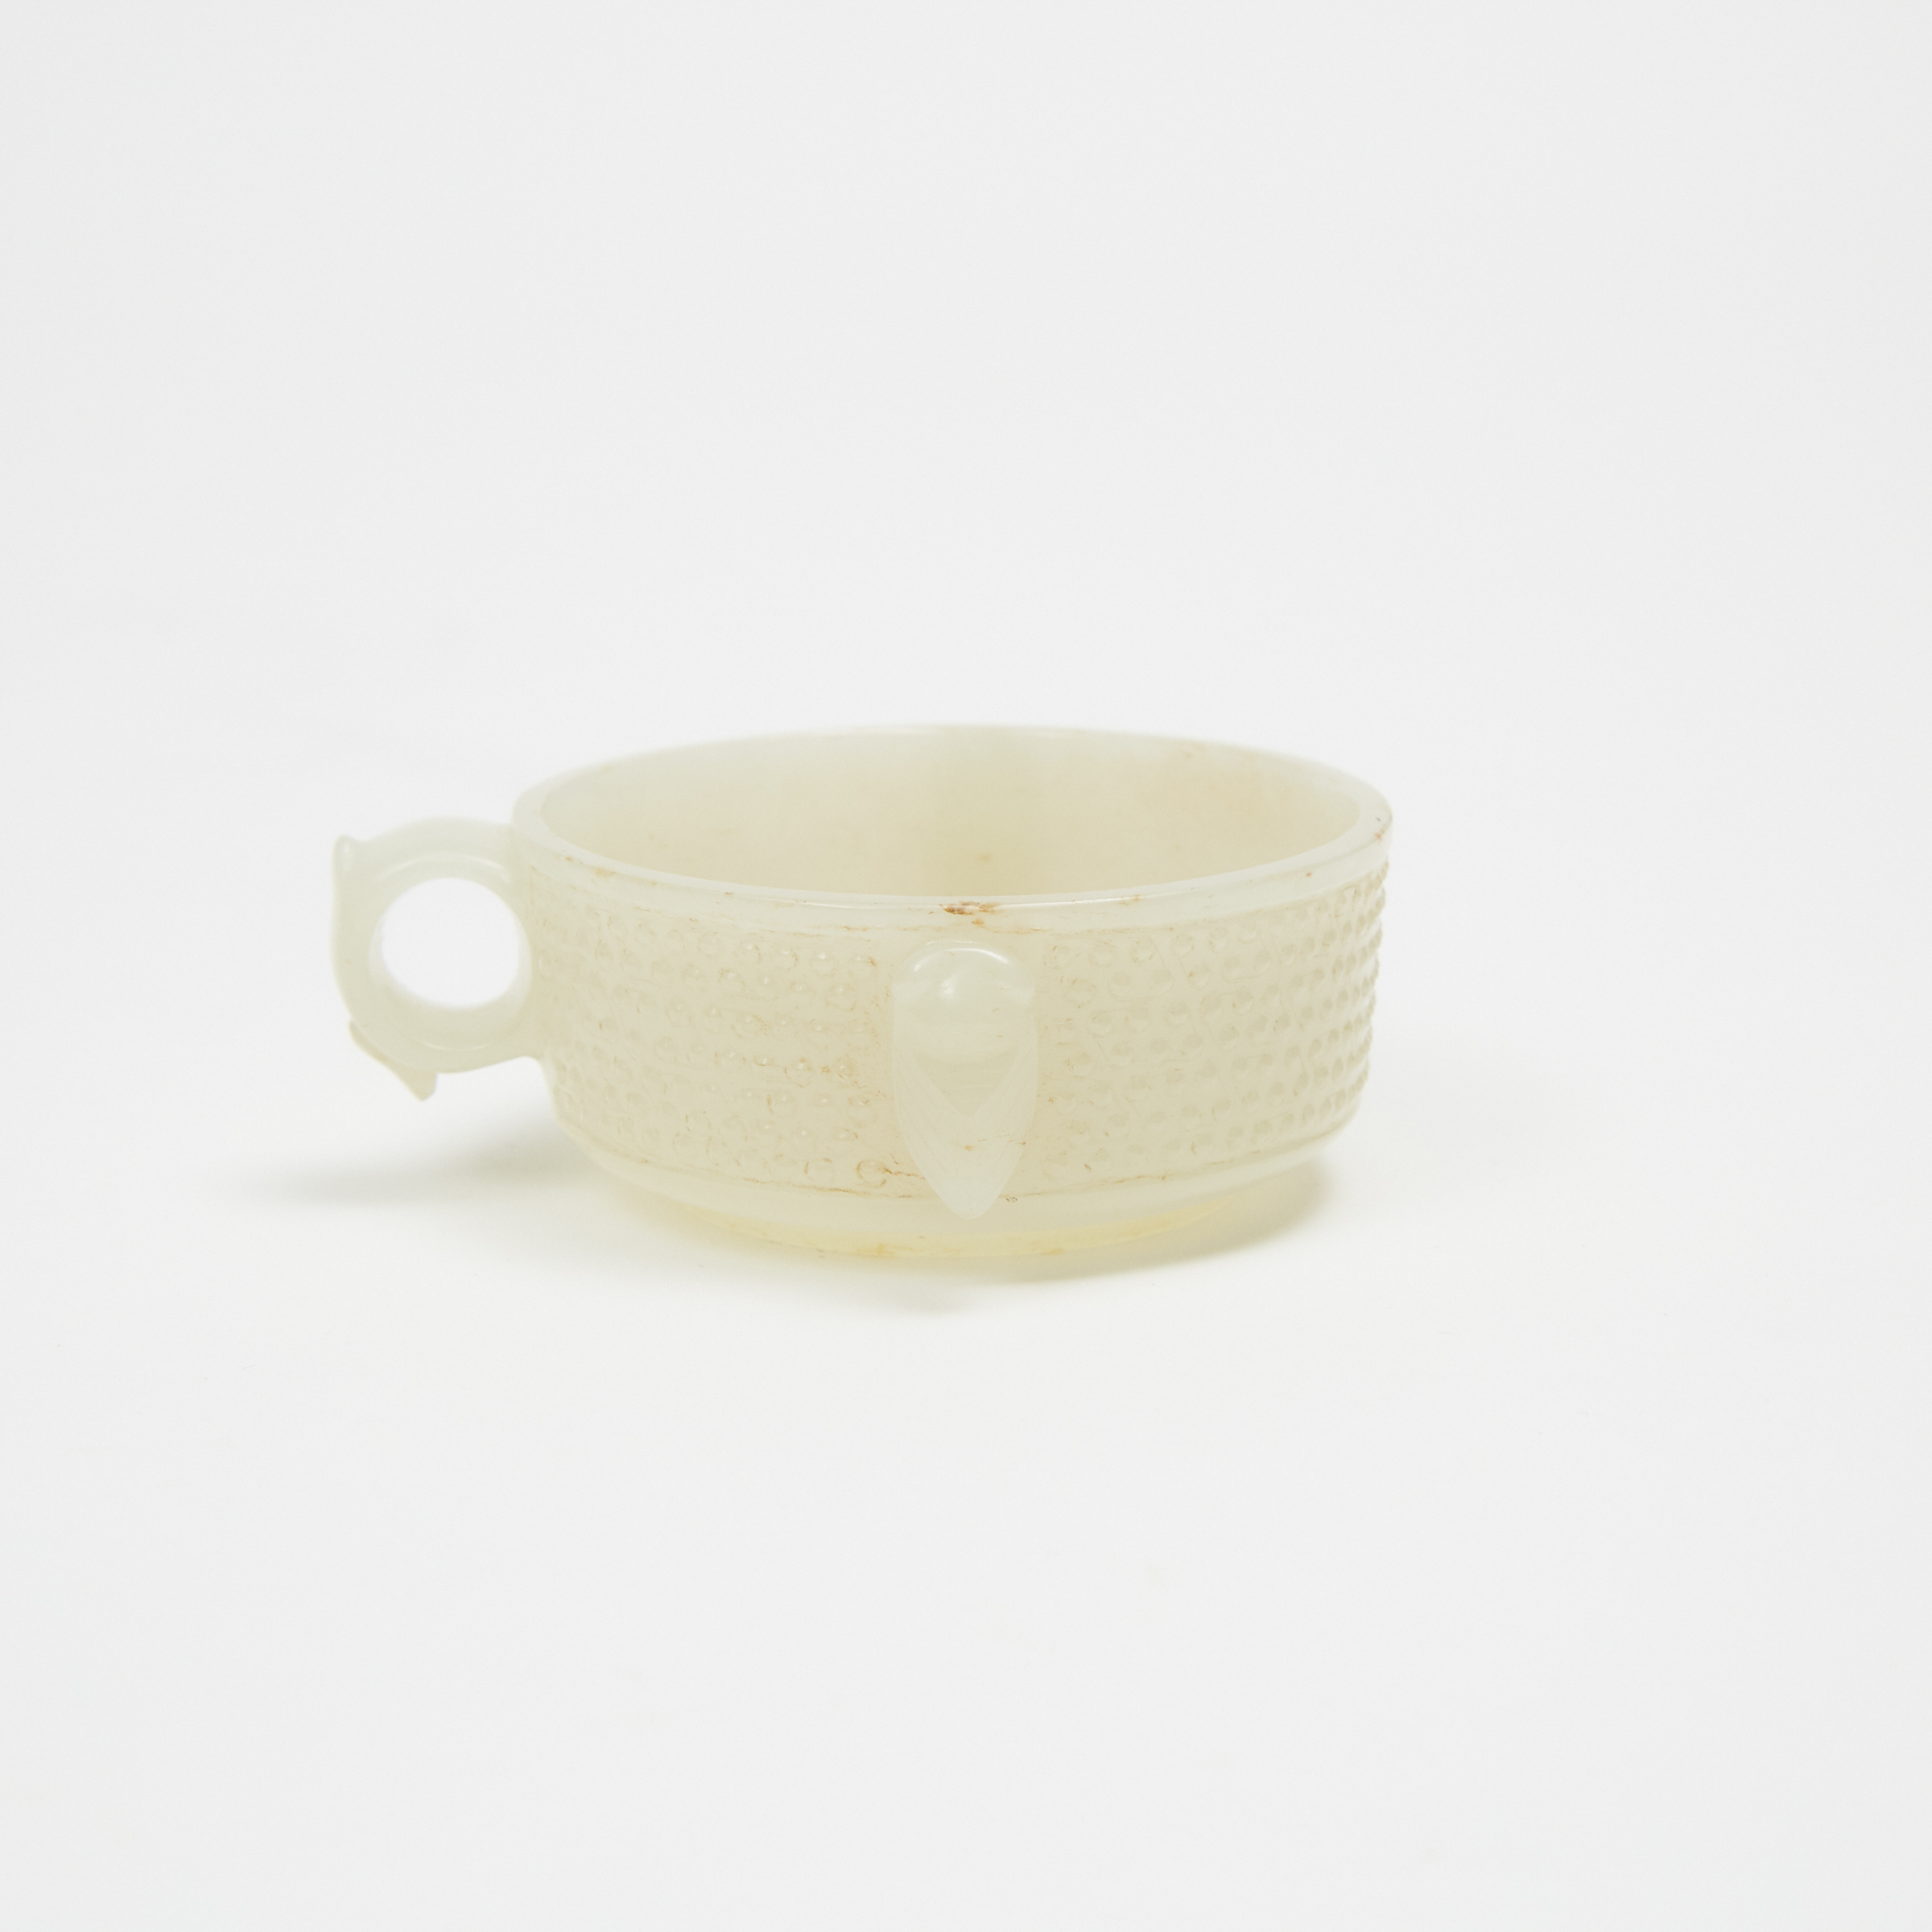 An Archaic Style White Jade Cup, Early 20th Century